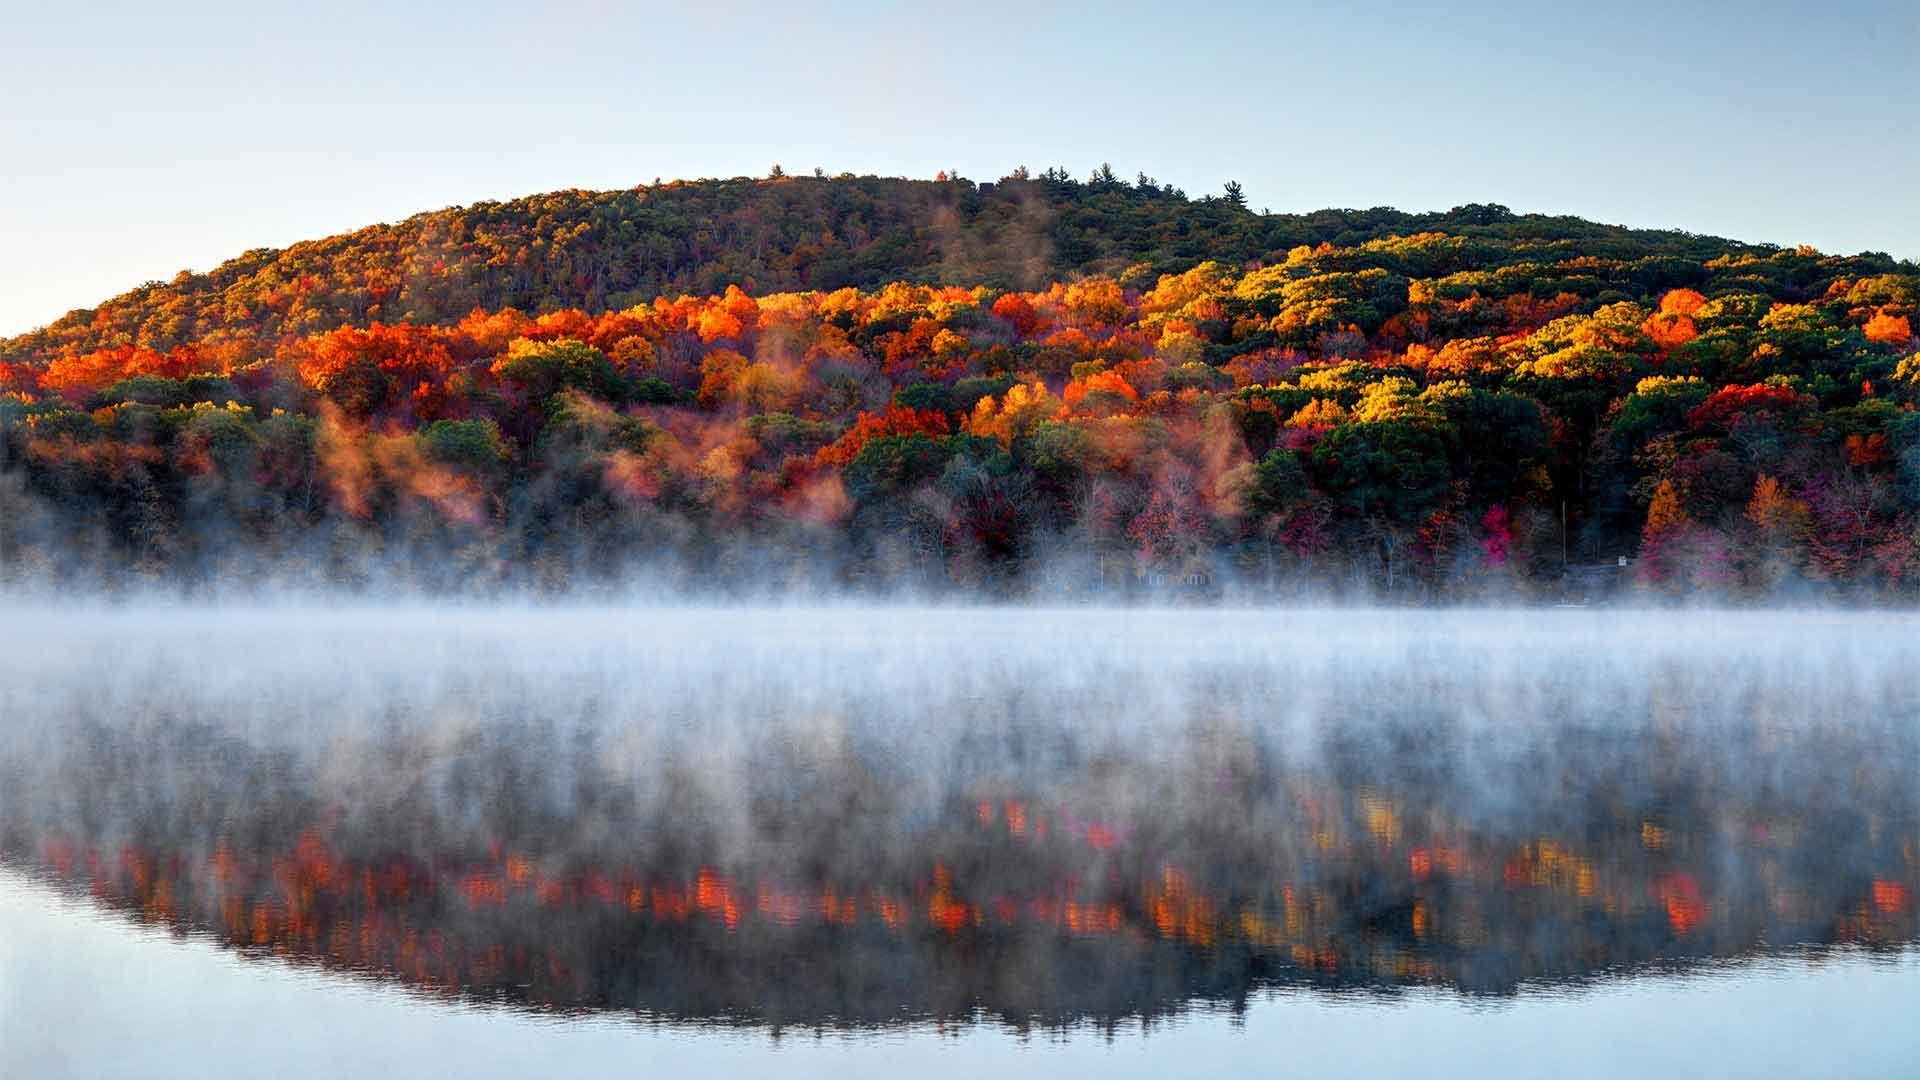 Autumn mist on a small pond in the Litchfield Hills of Connecticut.